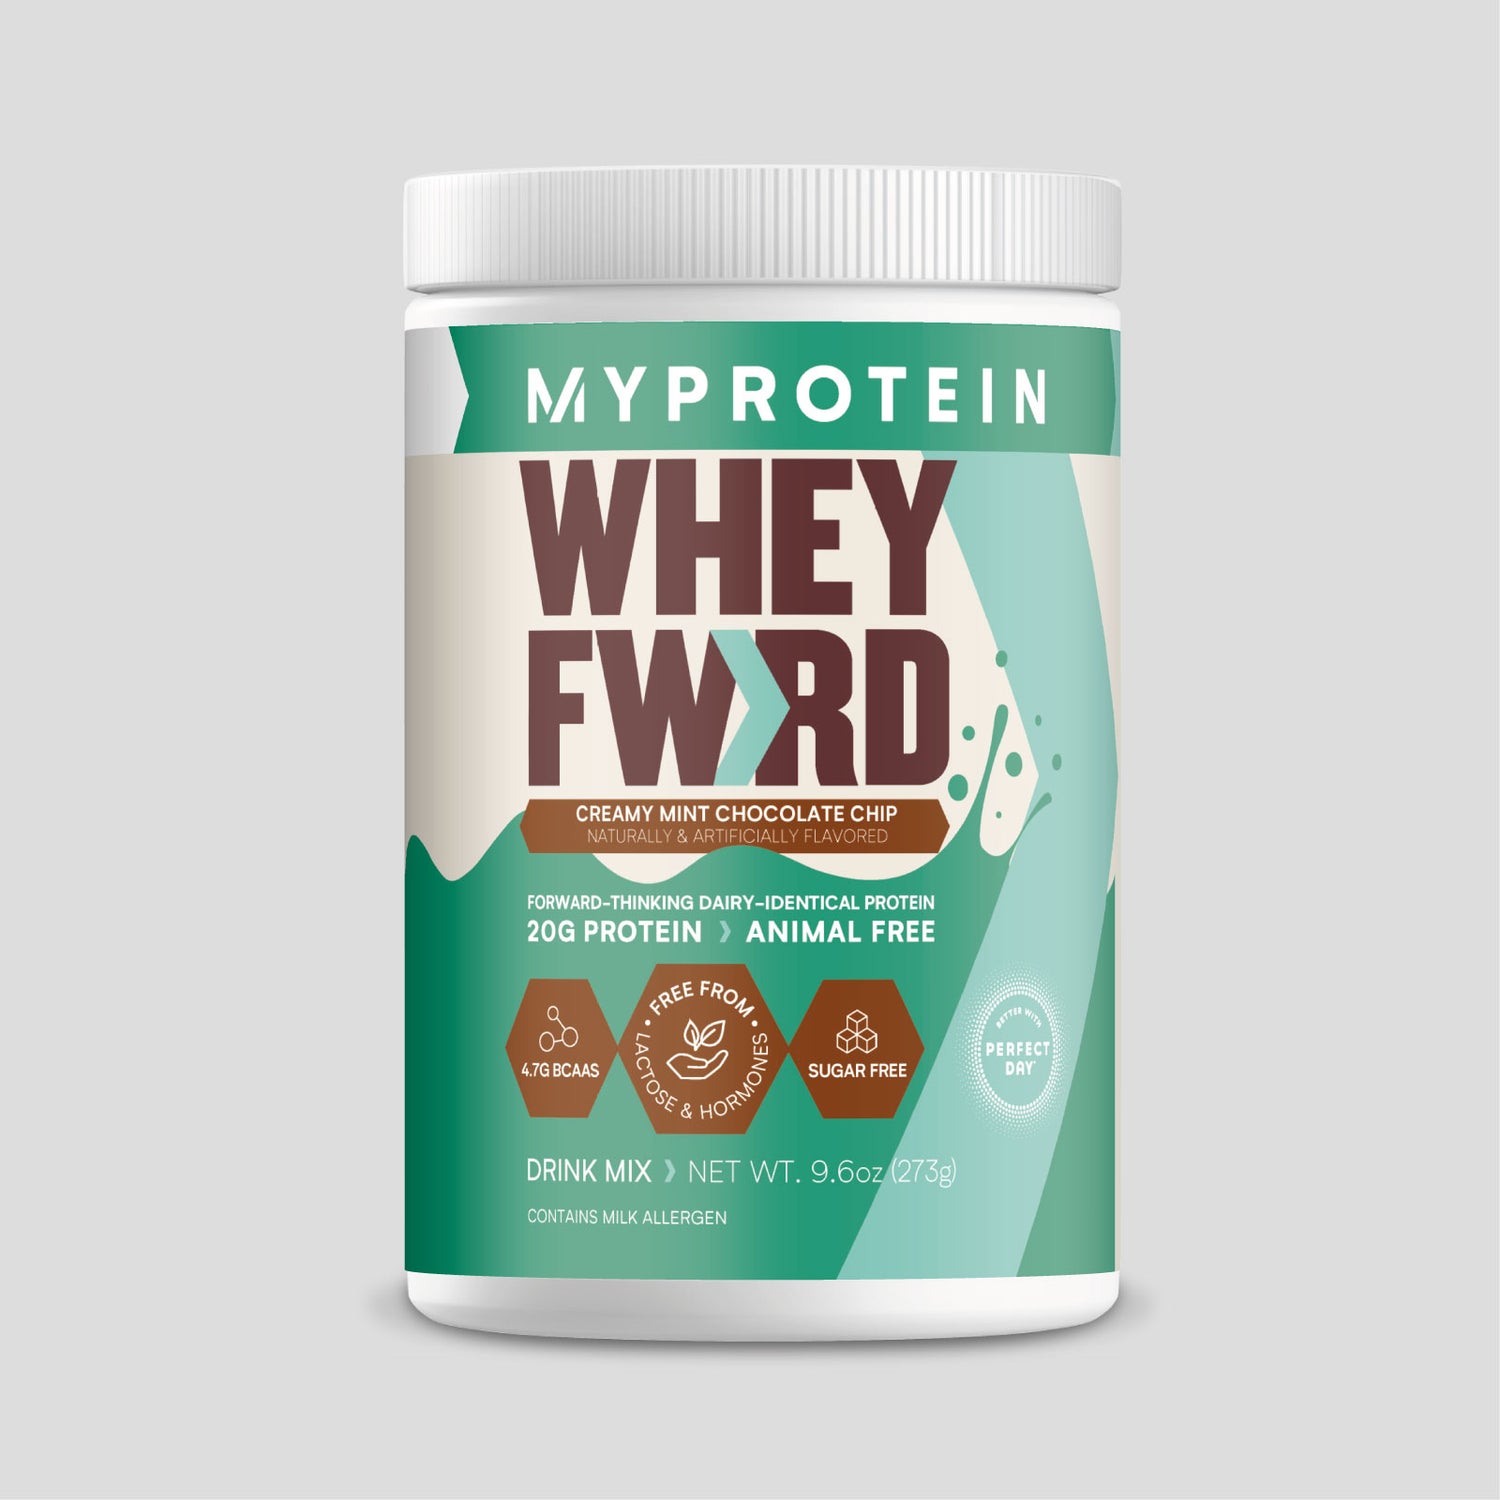 Myprotein Animal Free Whey Protein (USA) - 32portions - Creamy Mint Chocolate Chip